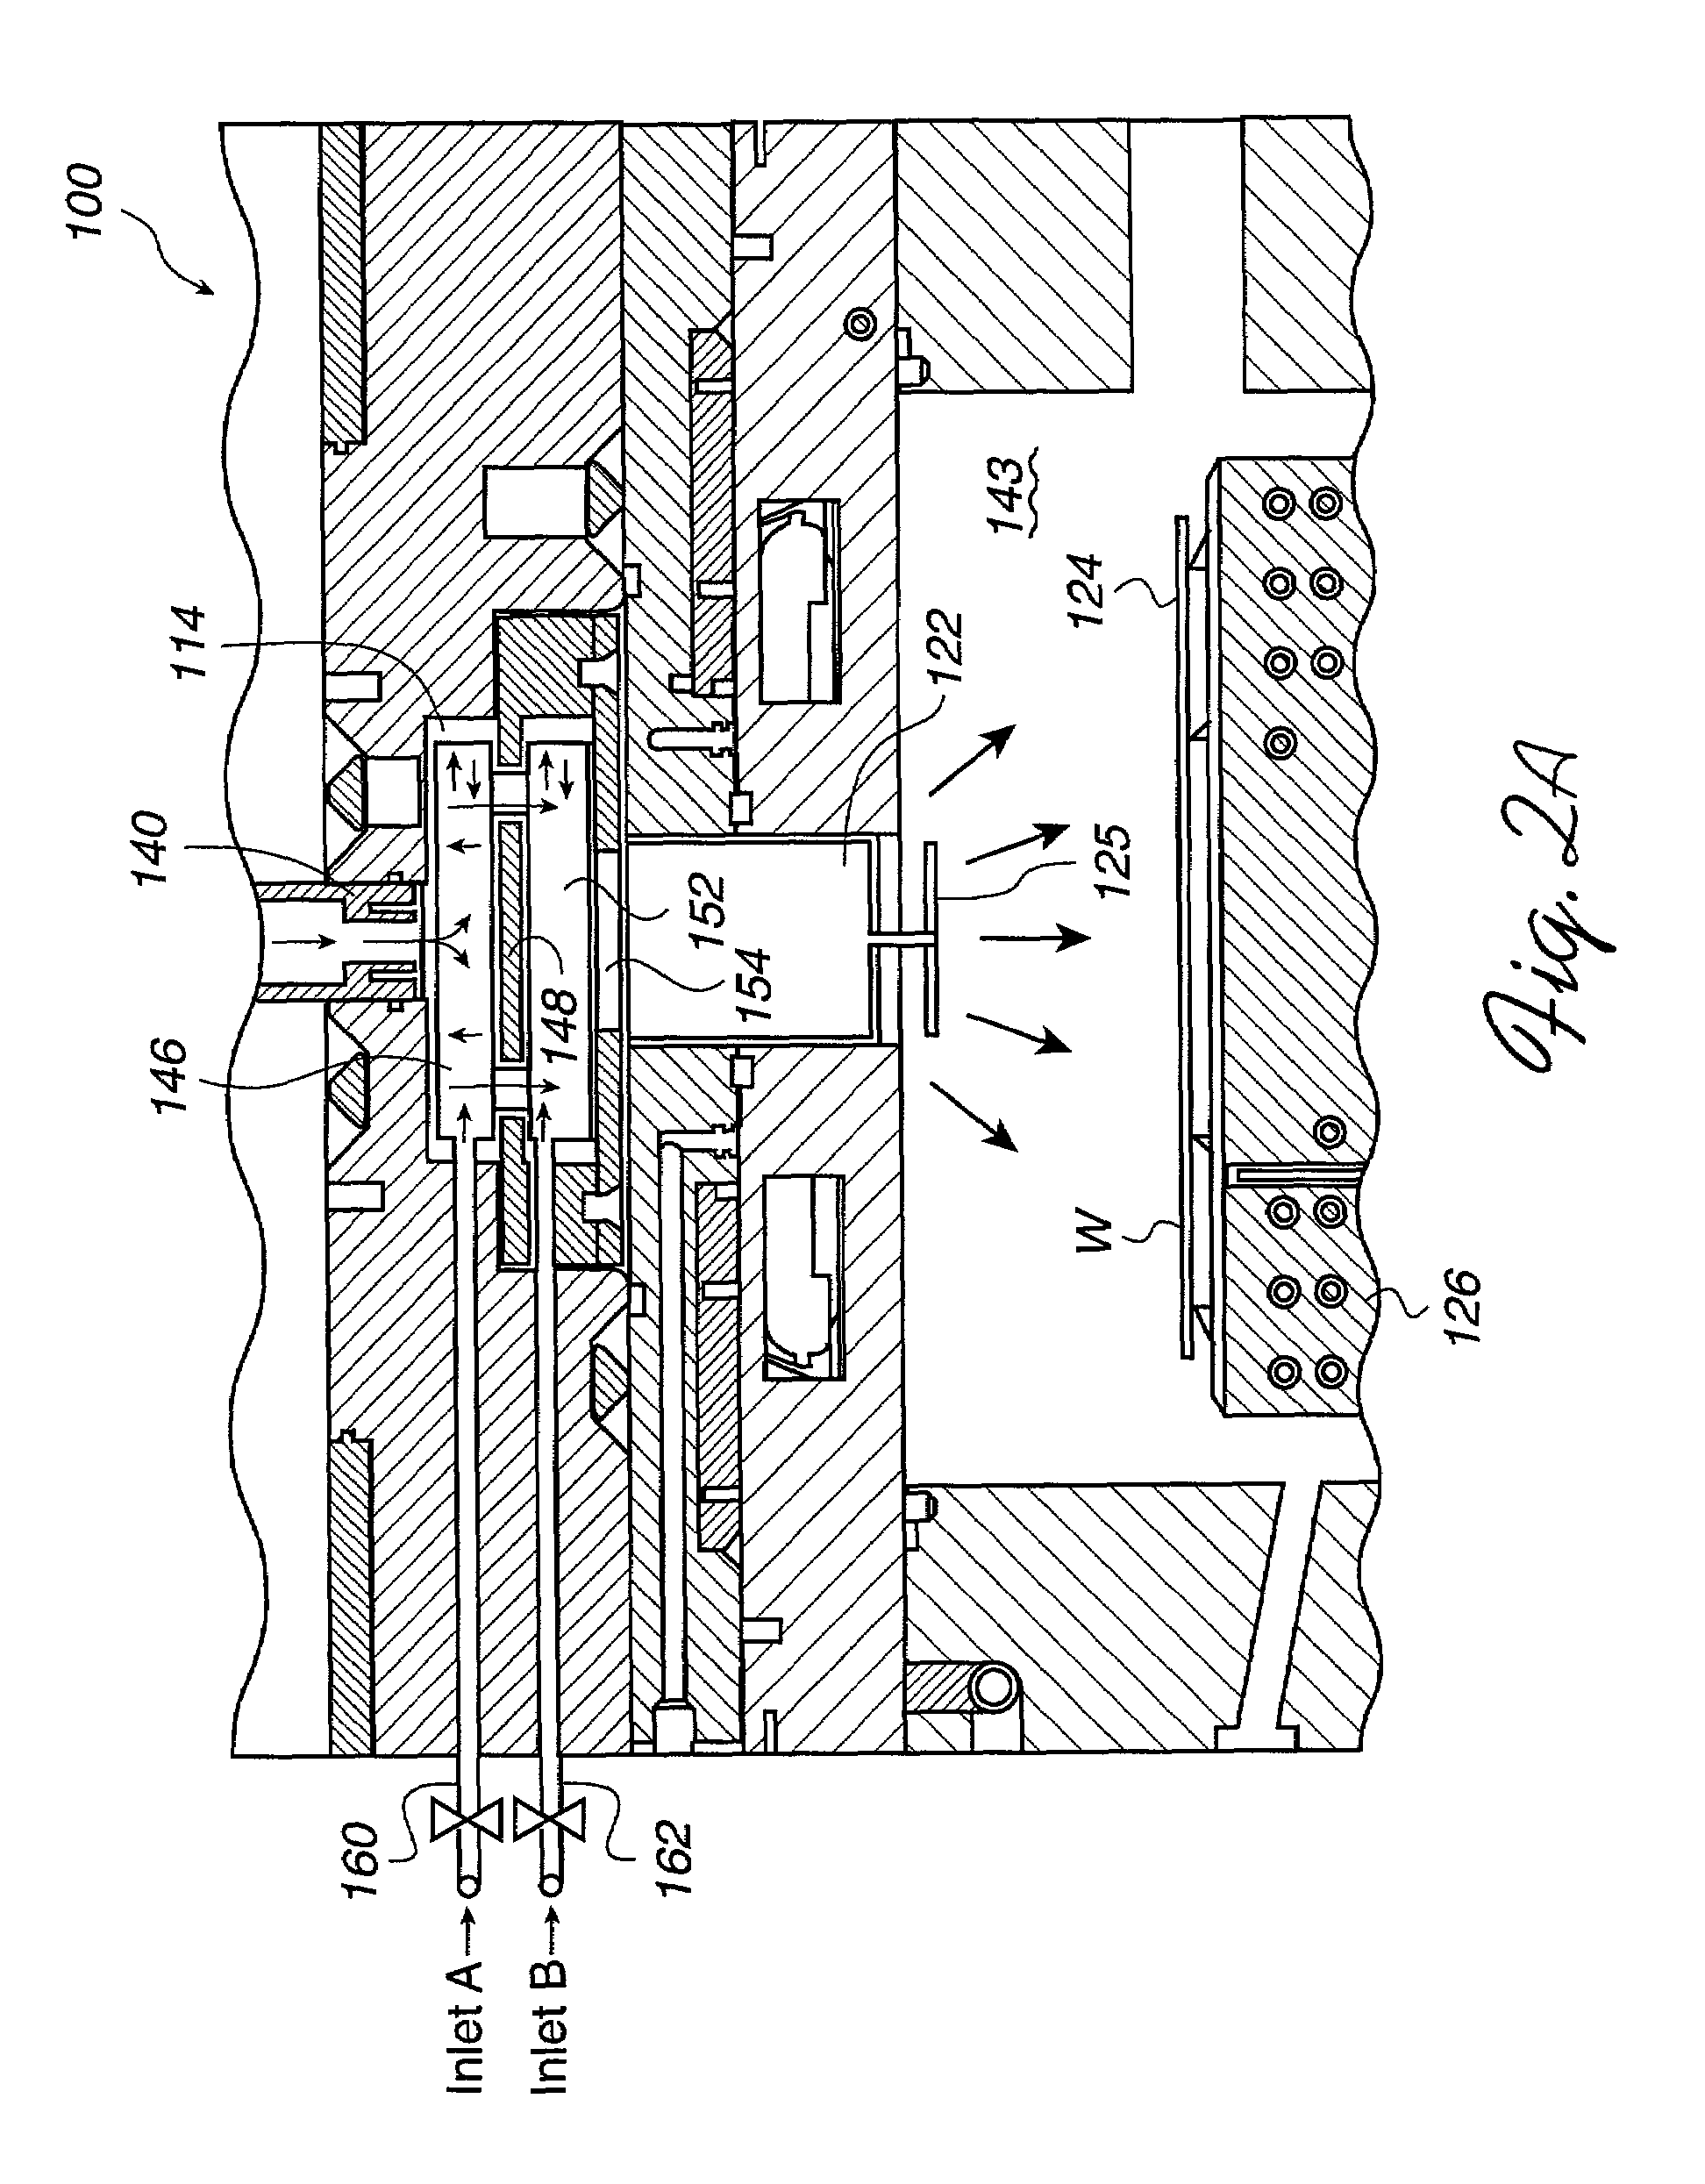 Method and apparatus for plasma optimization in water processing